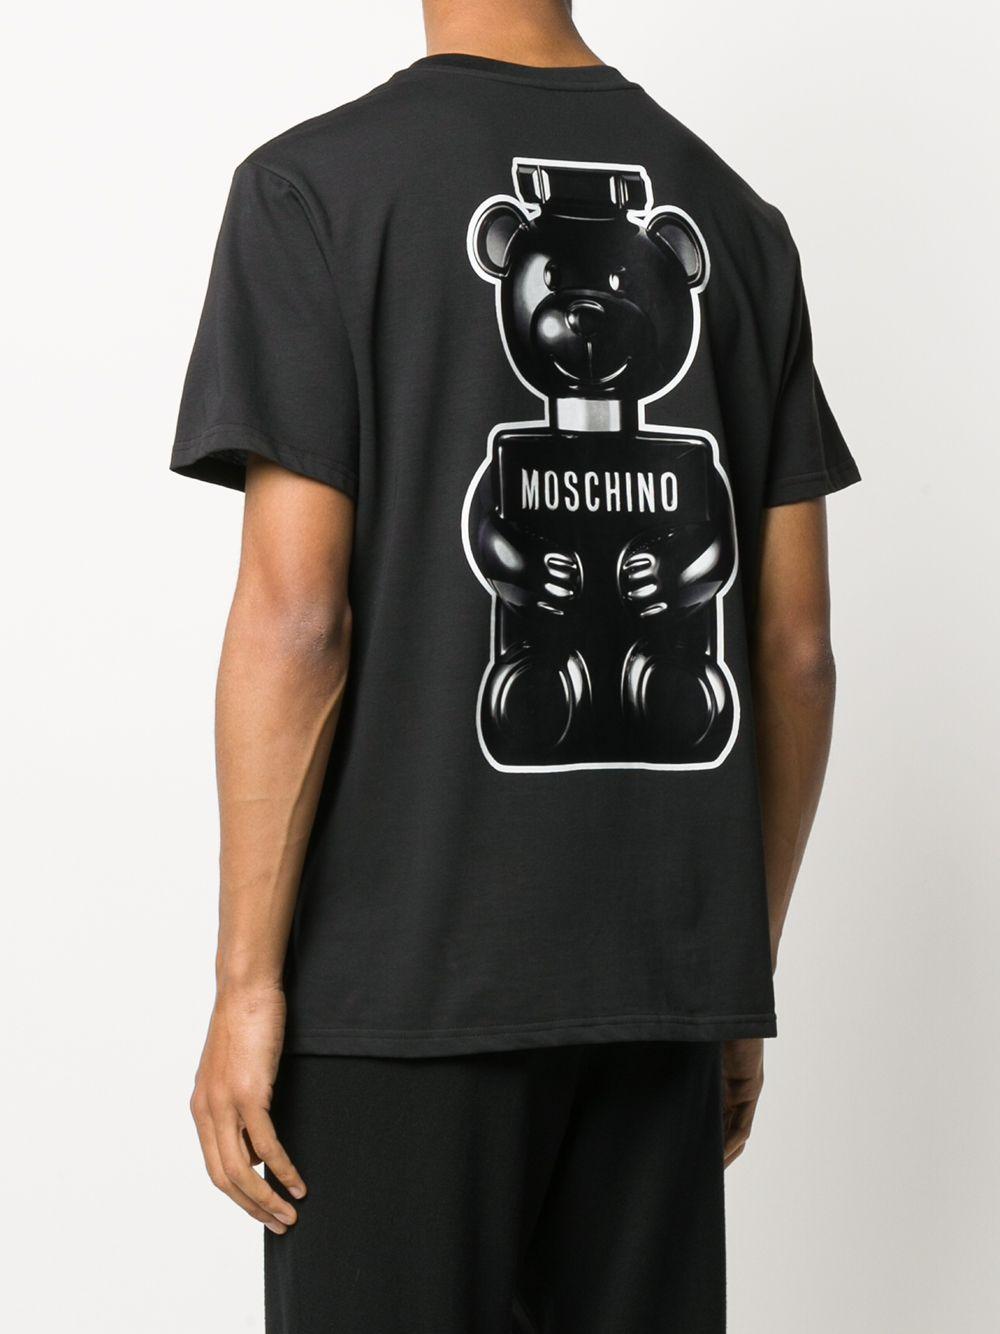 Moschino Toy Boy Perfume T-shirt in Black for Men - Lyst